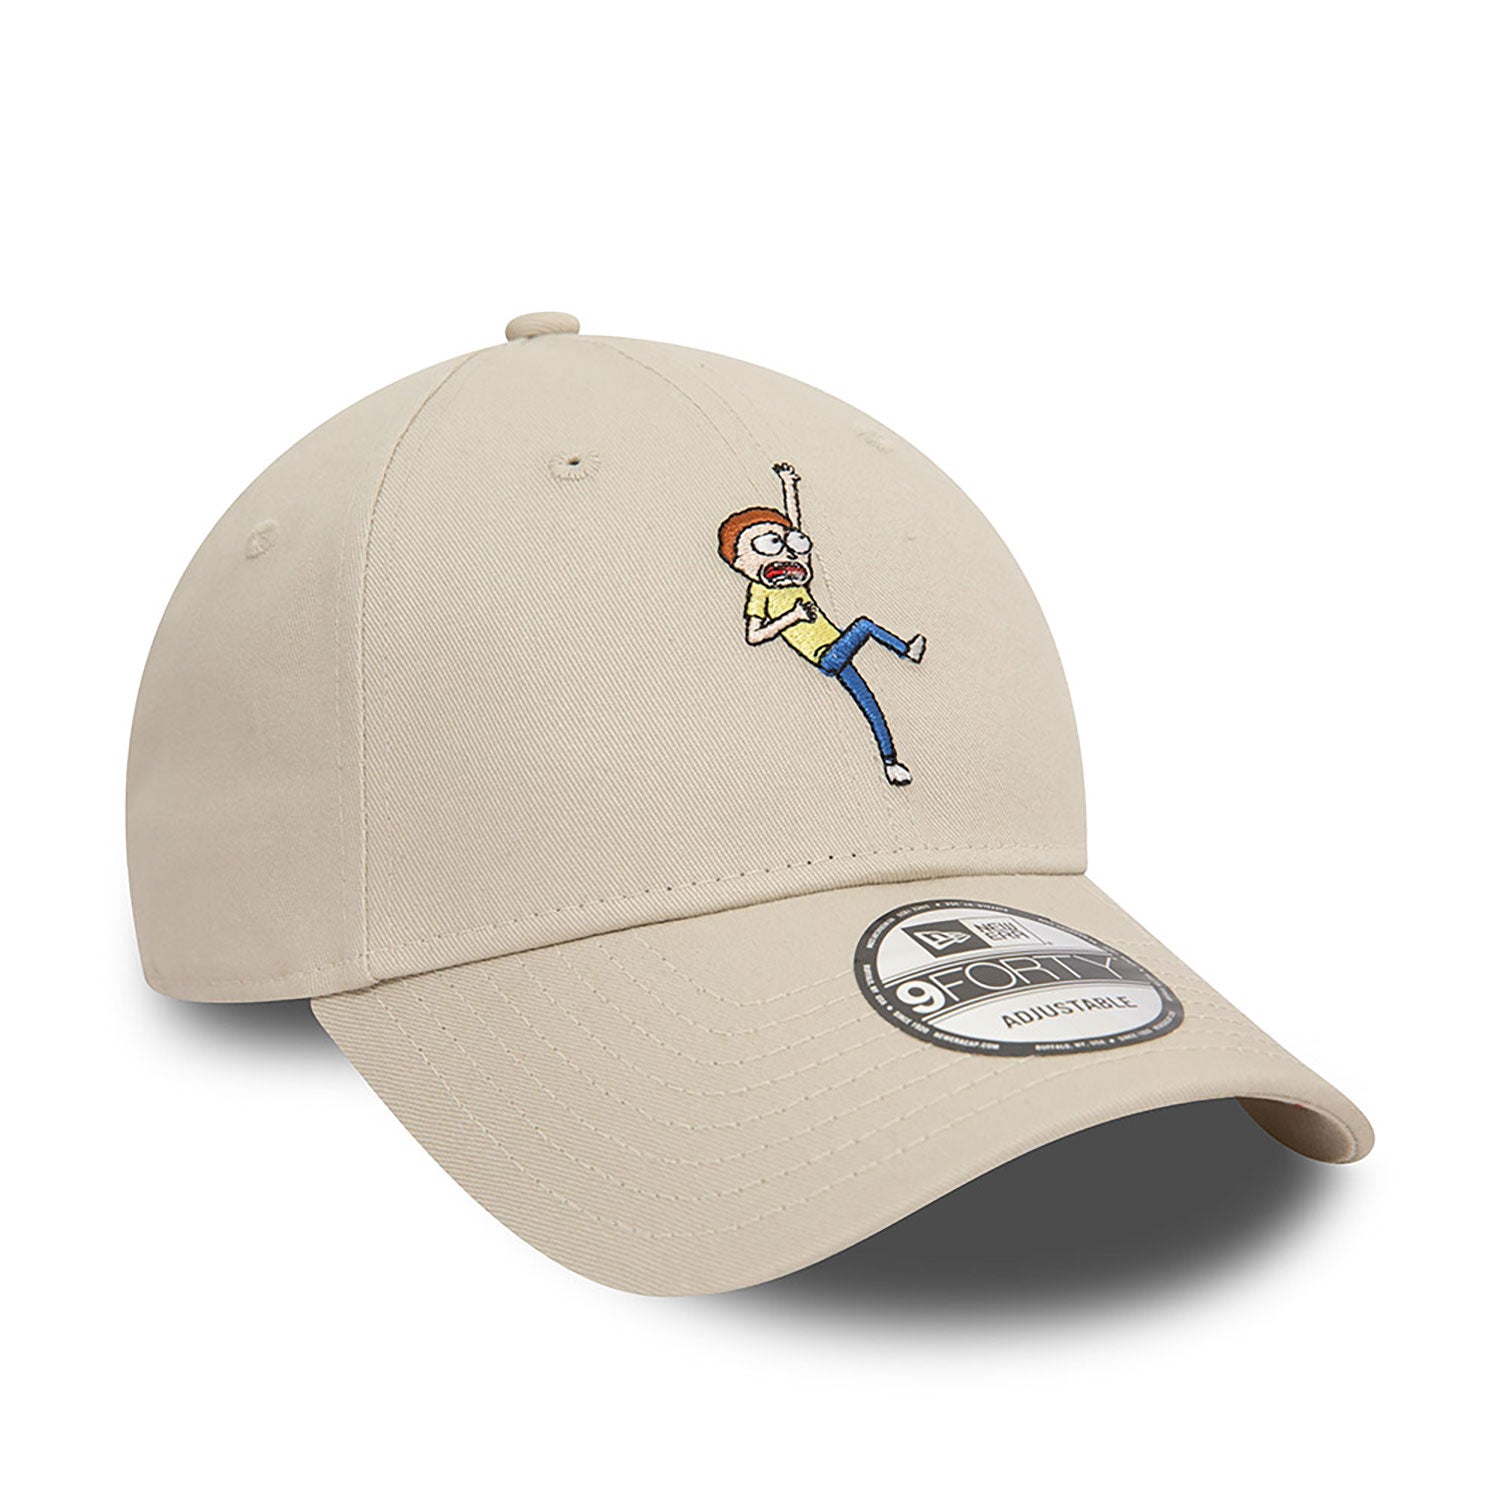 New Era Cap/Rick and Morty - 9FORTY "Morty" Beige